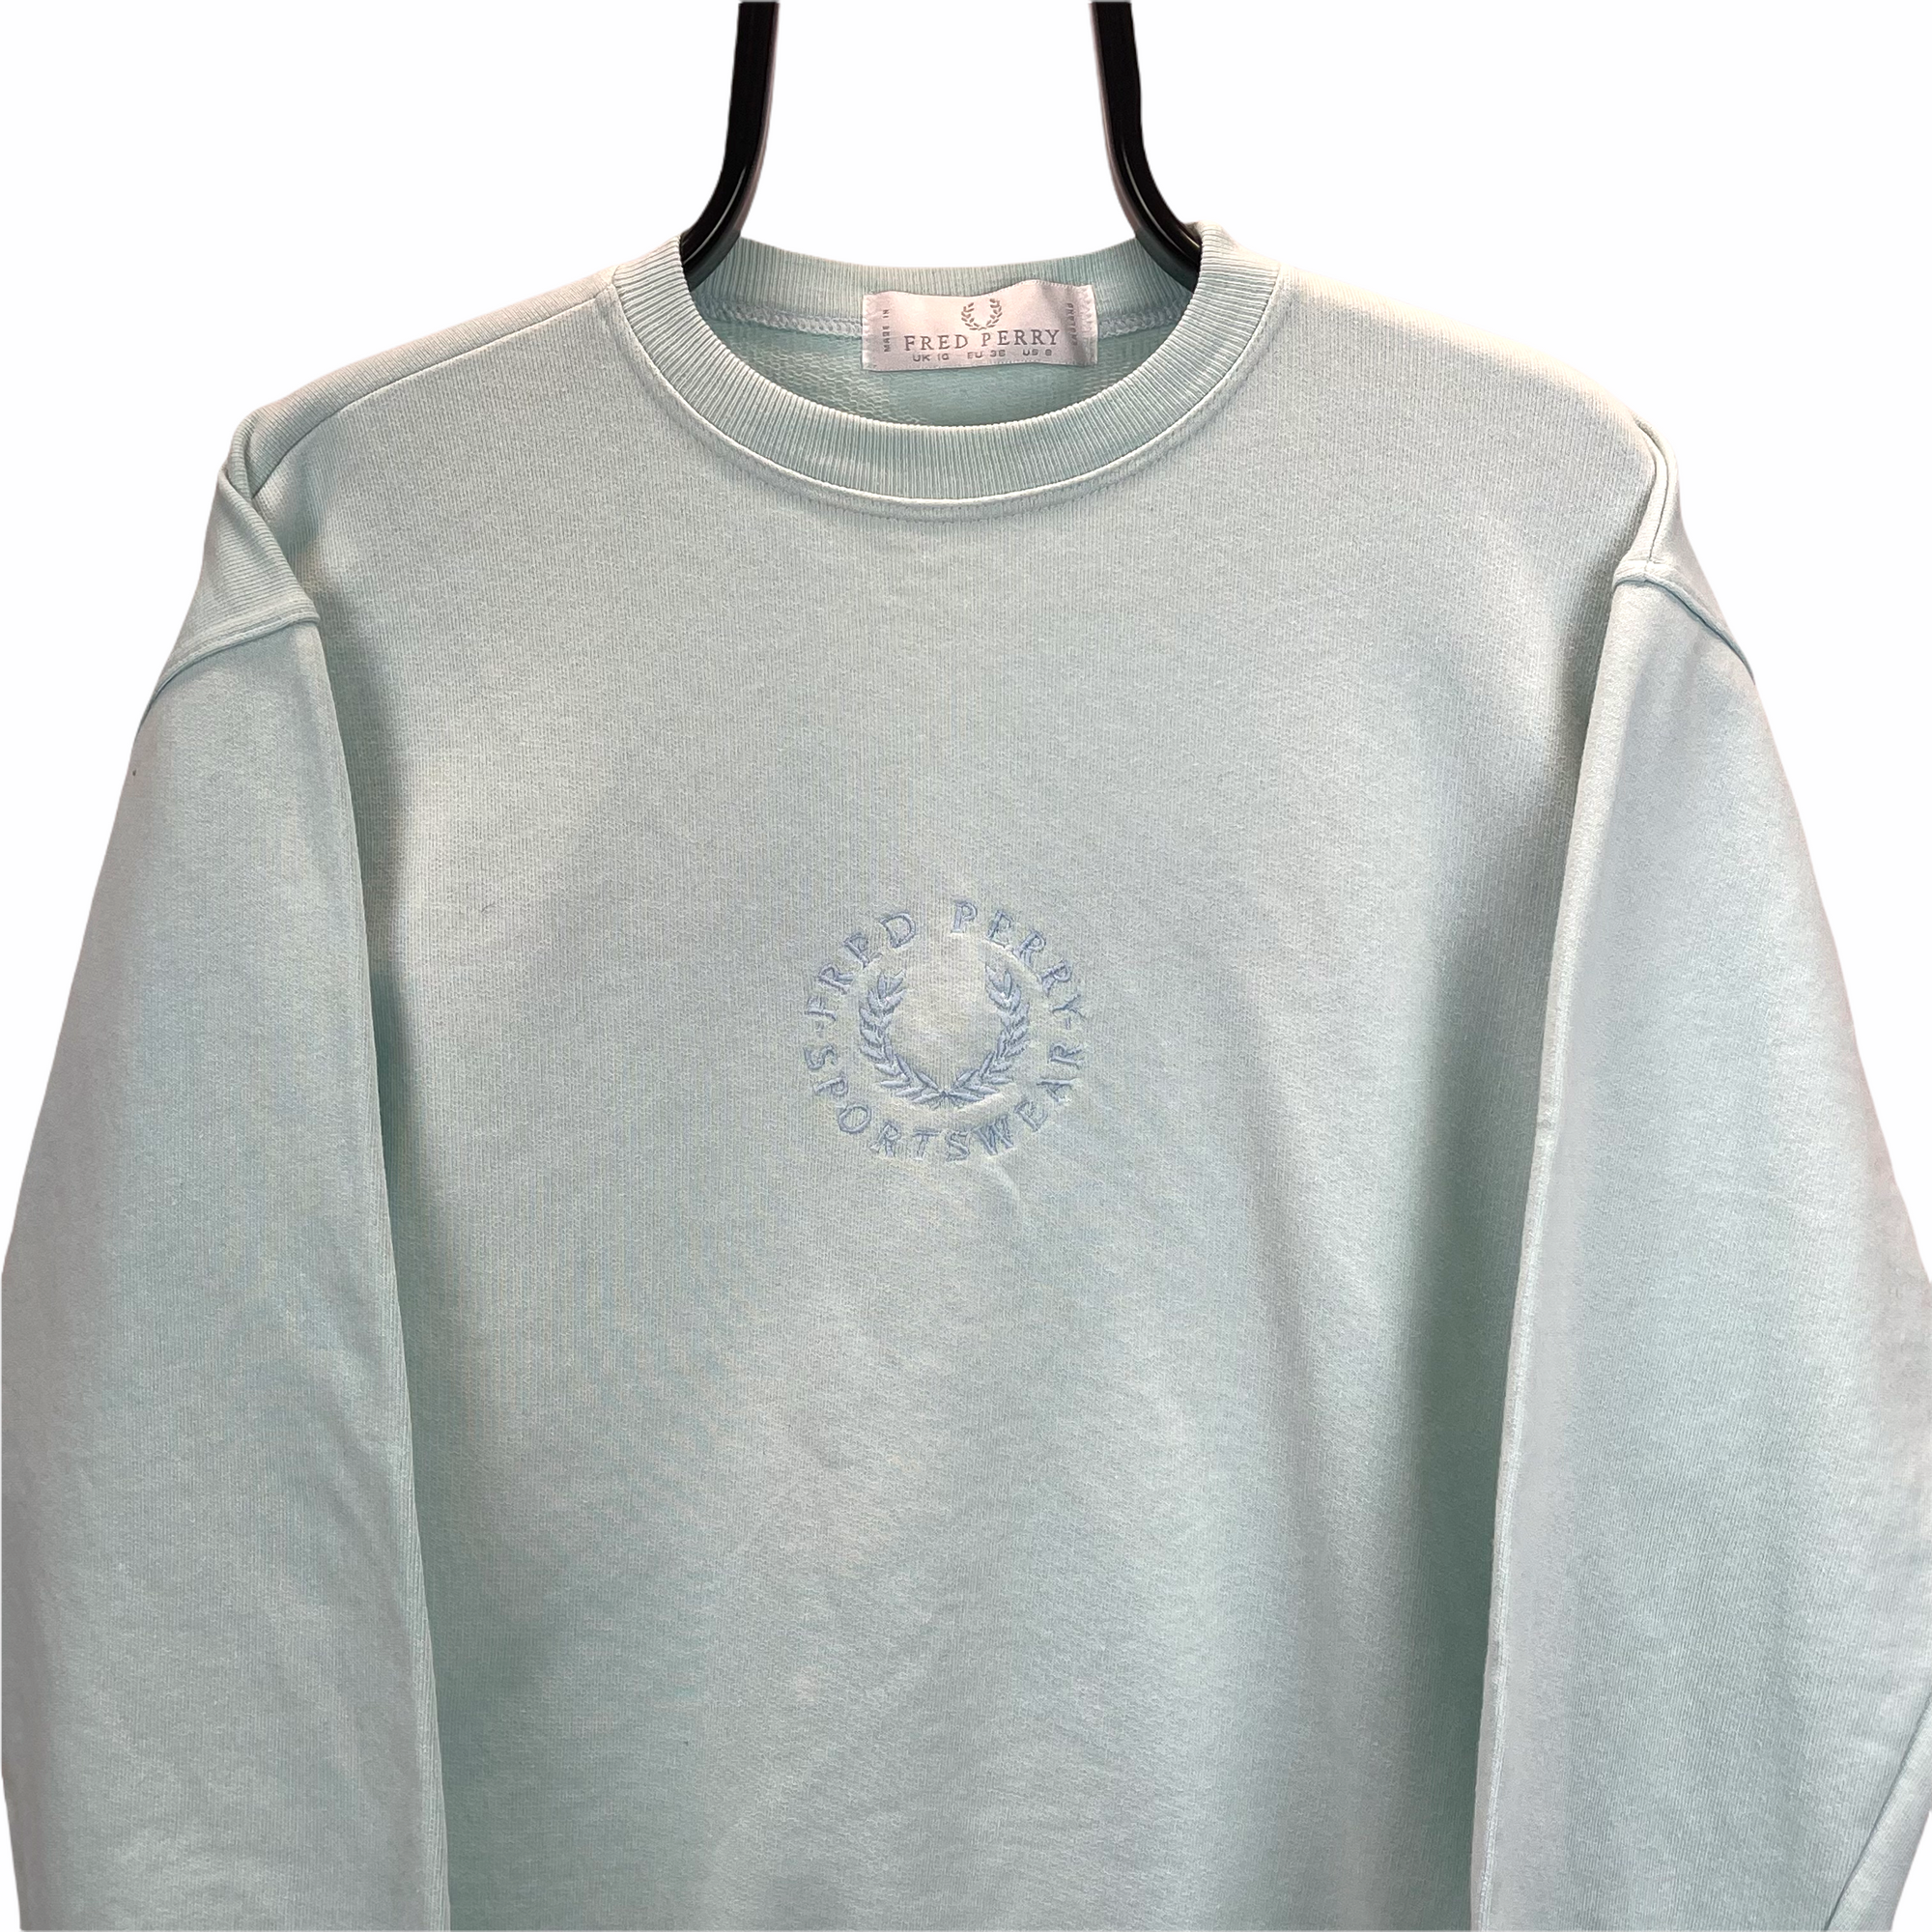 VINTAGE 90S FRED PERRY SPELLOUT IN ICE BLUE/MINT - MEN'S XS/WOMEN'S SMALL